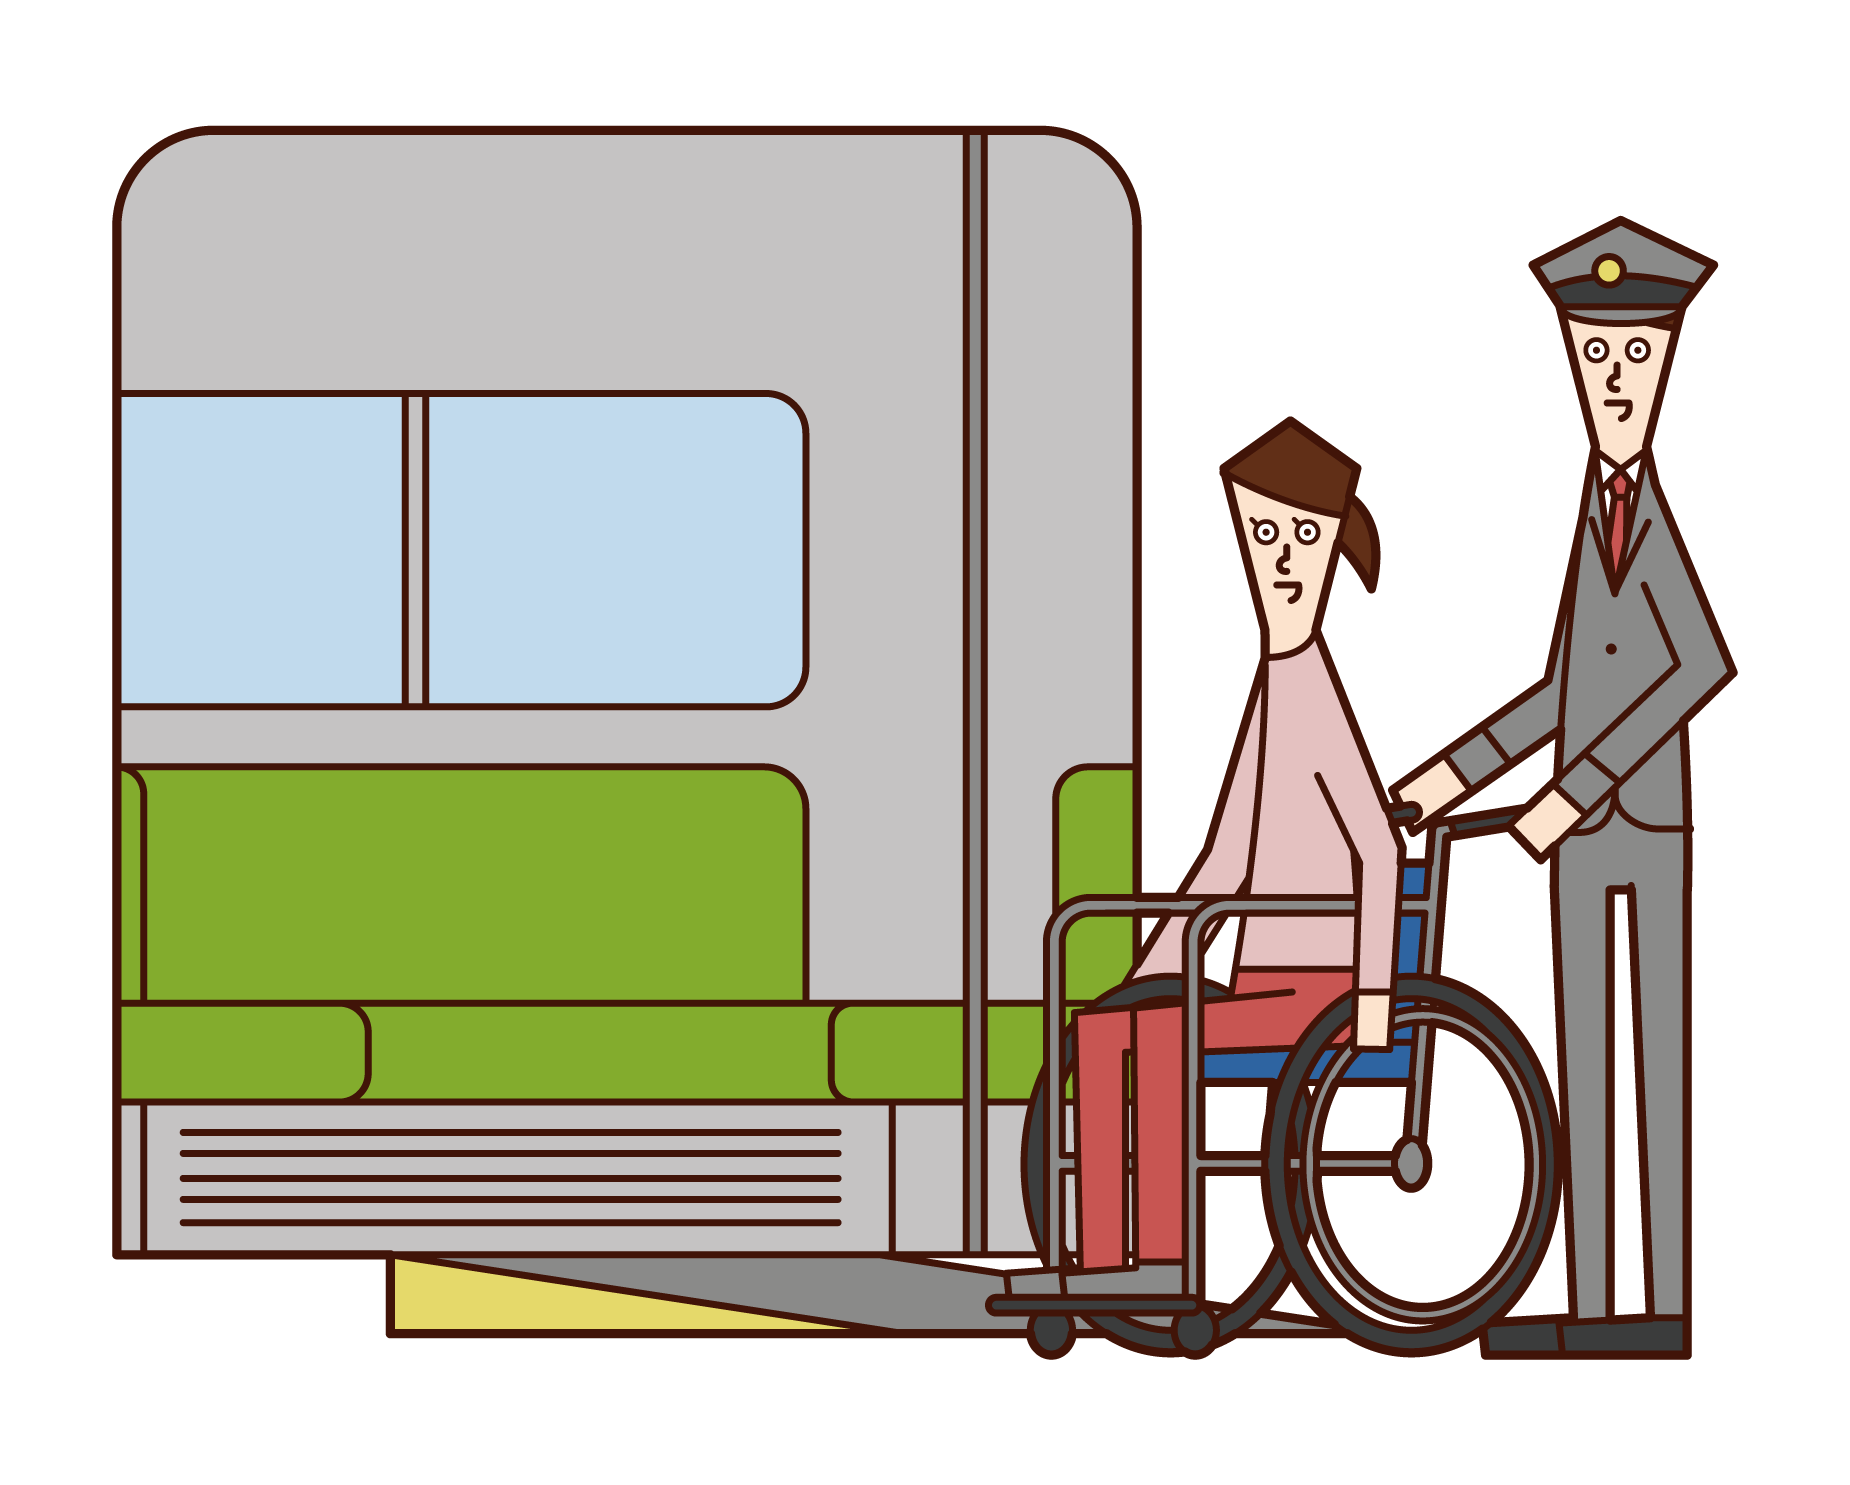 Illustration of a woman riding a wheelchair on a train